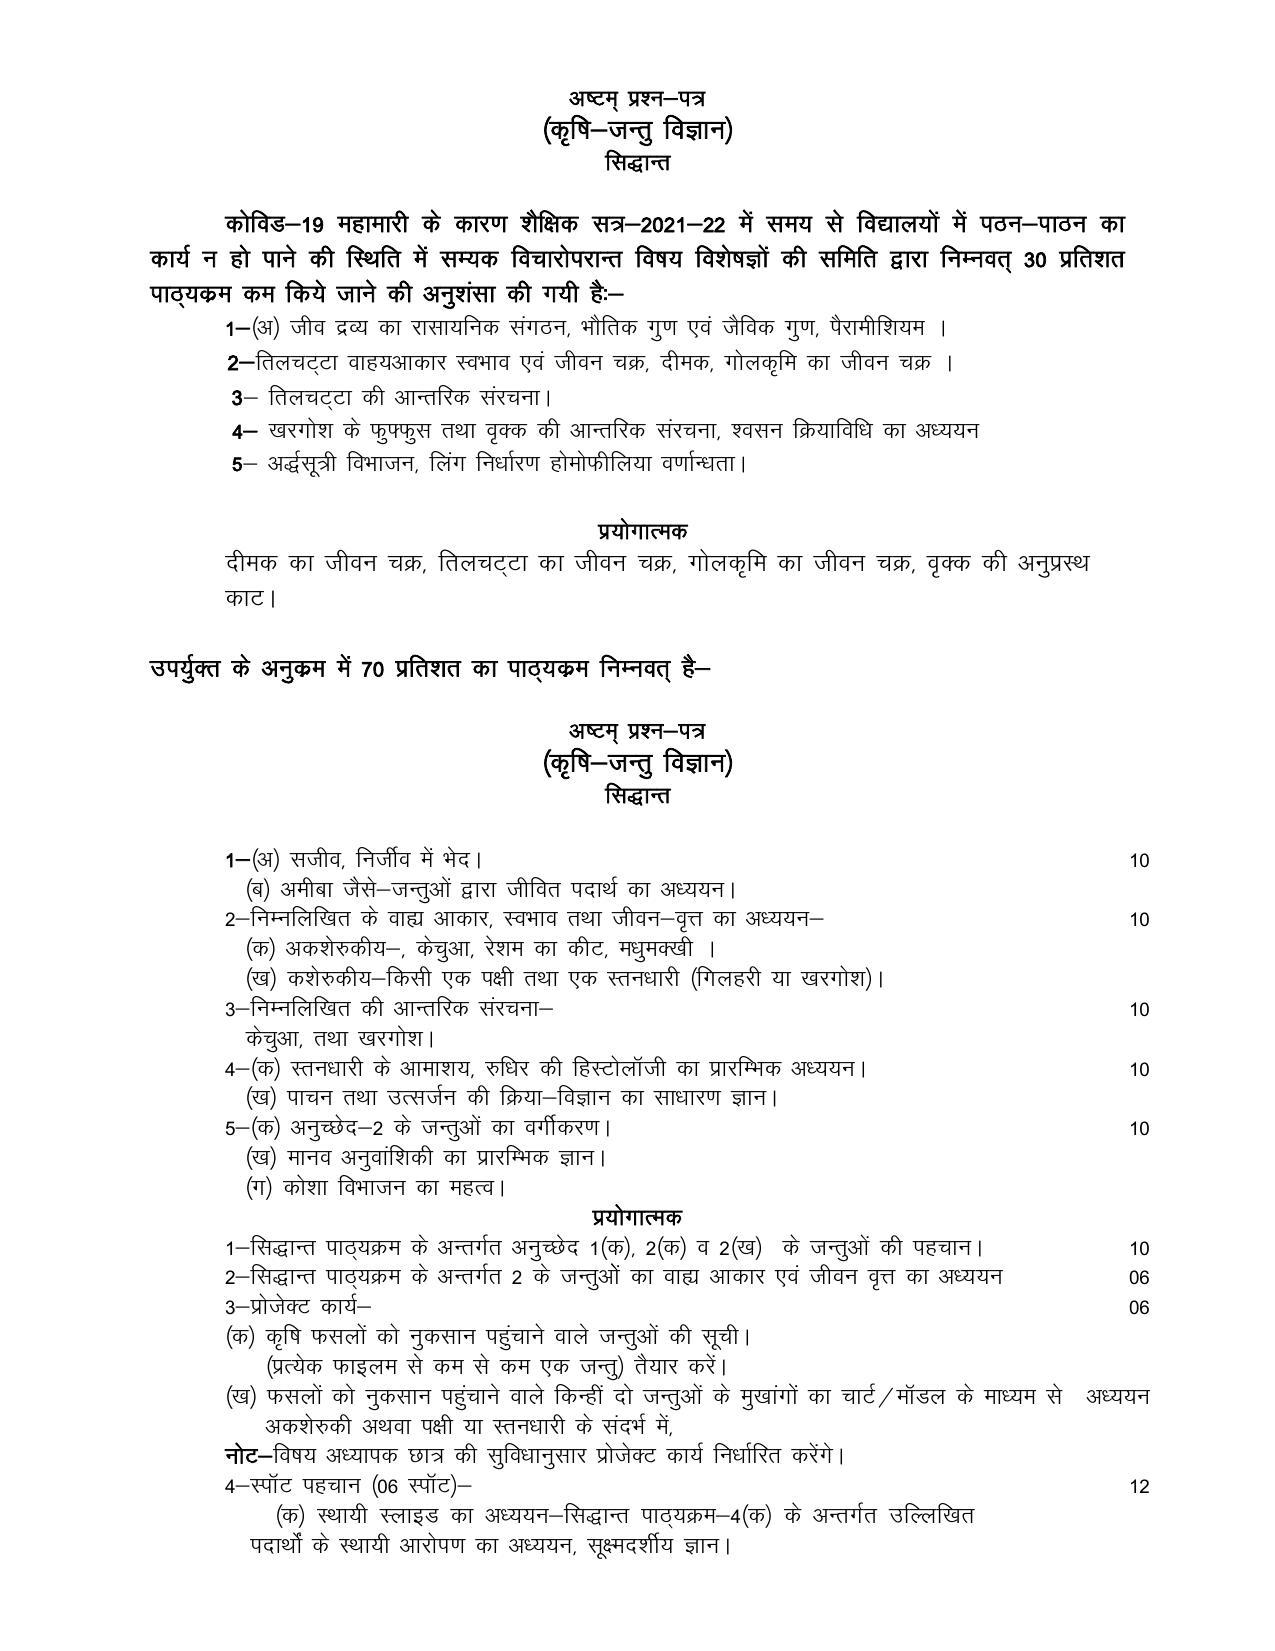 UP Board Class 12 Syllabus Agricultural Zoology - Page 1